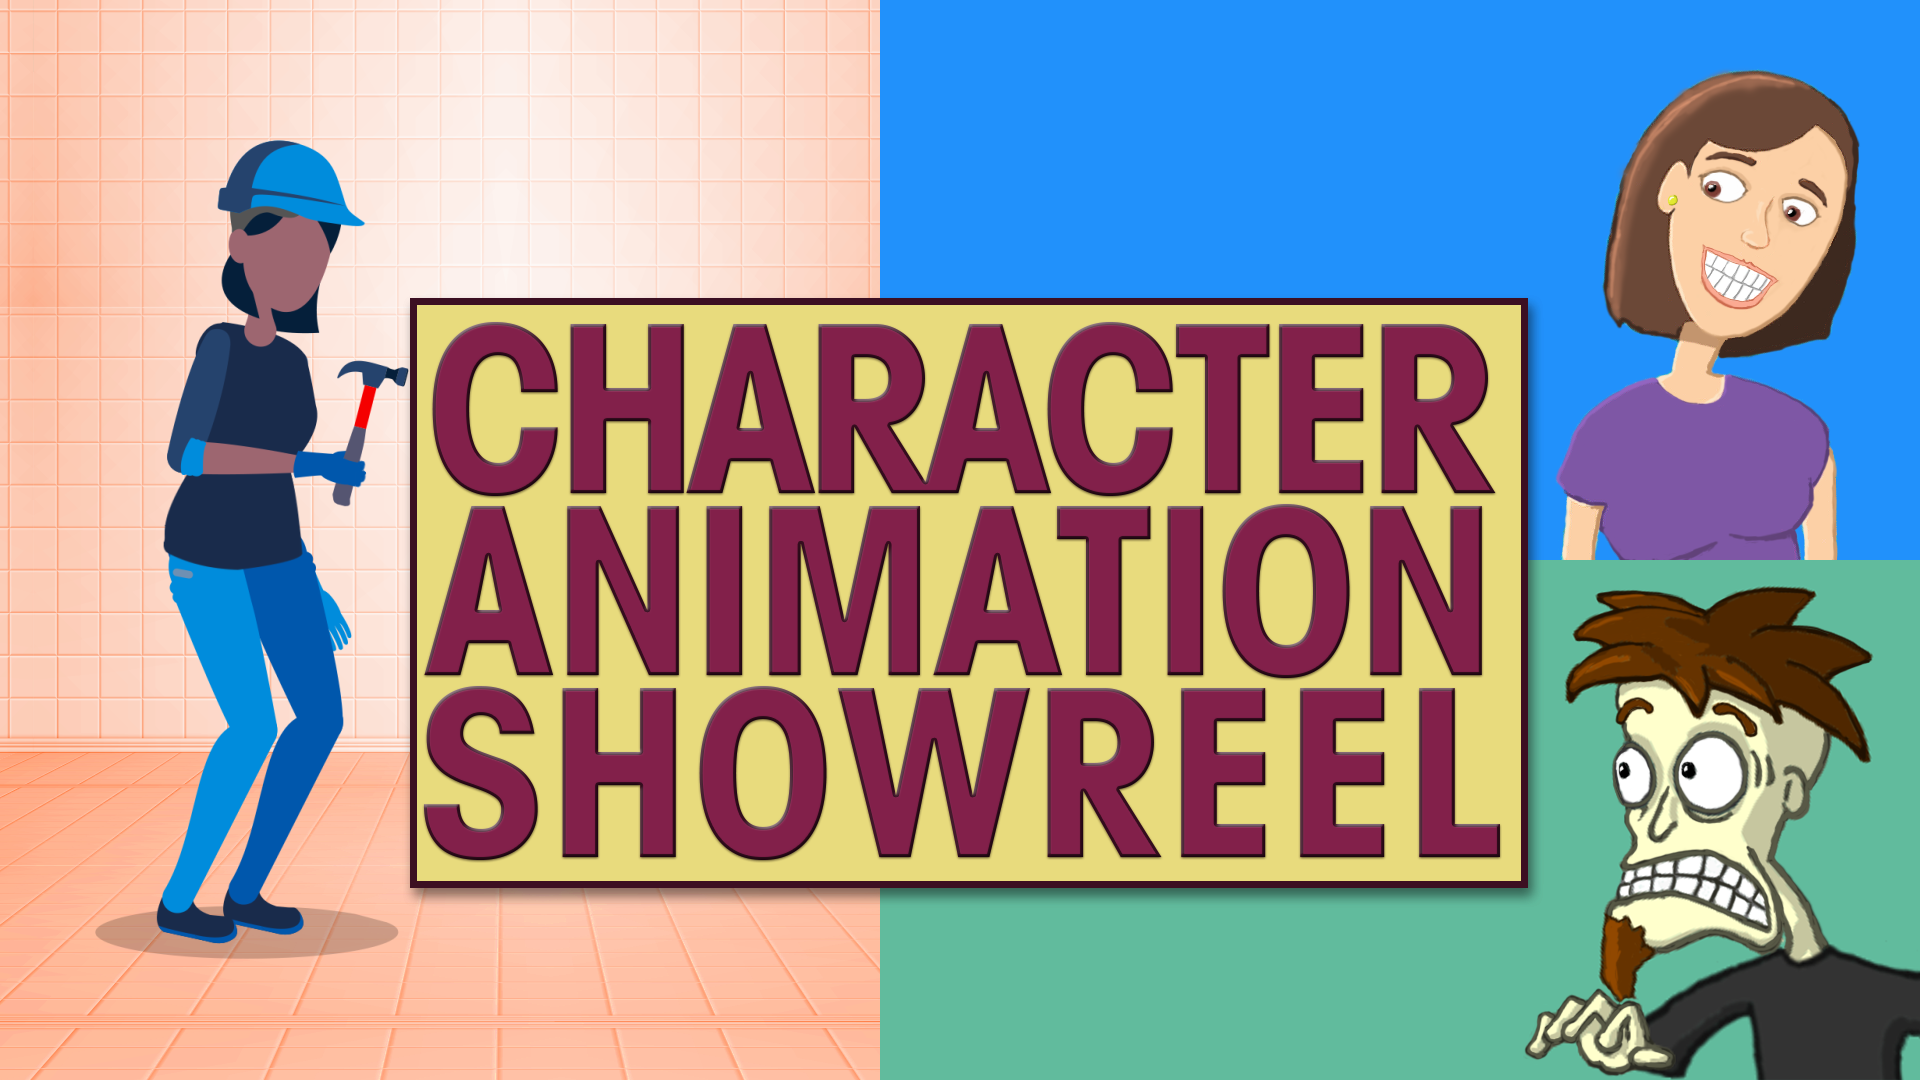 2D Character Animation Showreel